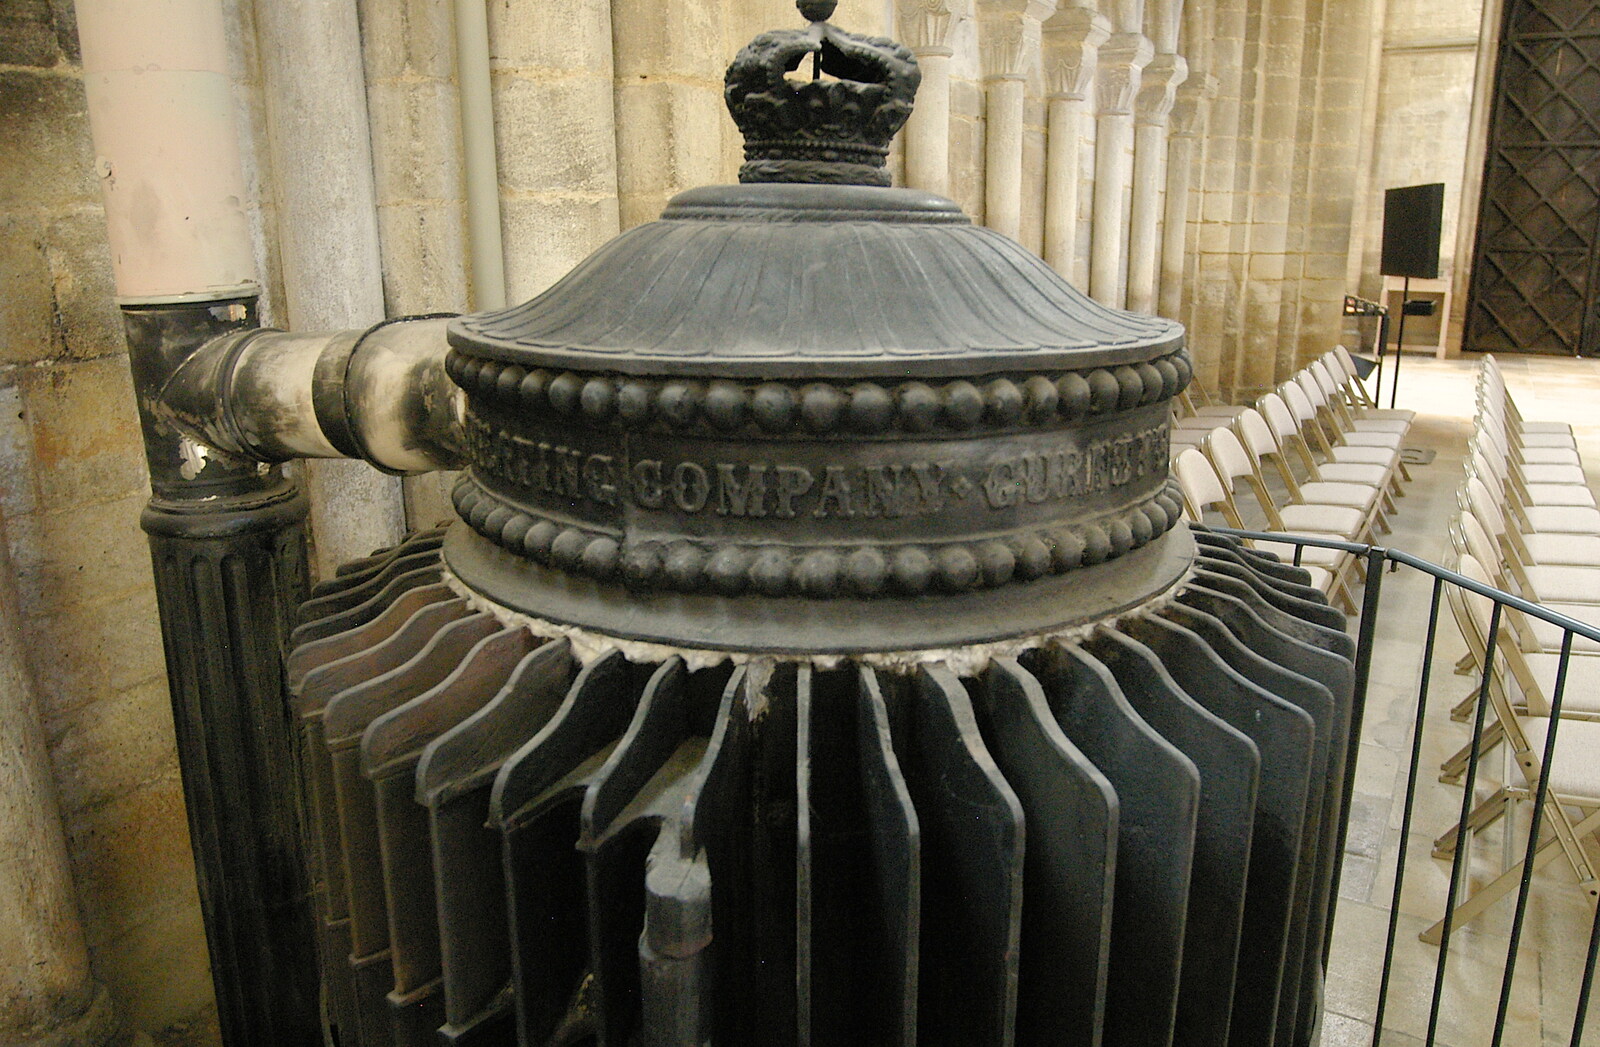 An interesting victorian radiator from Peterborough Cathedral, Cambridgeshire - 7th September 2005